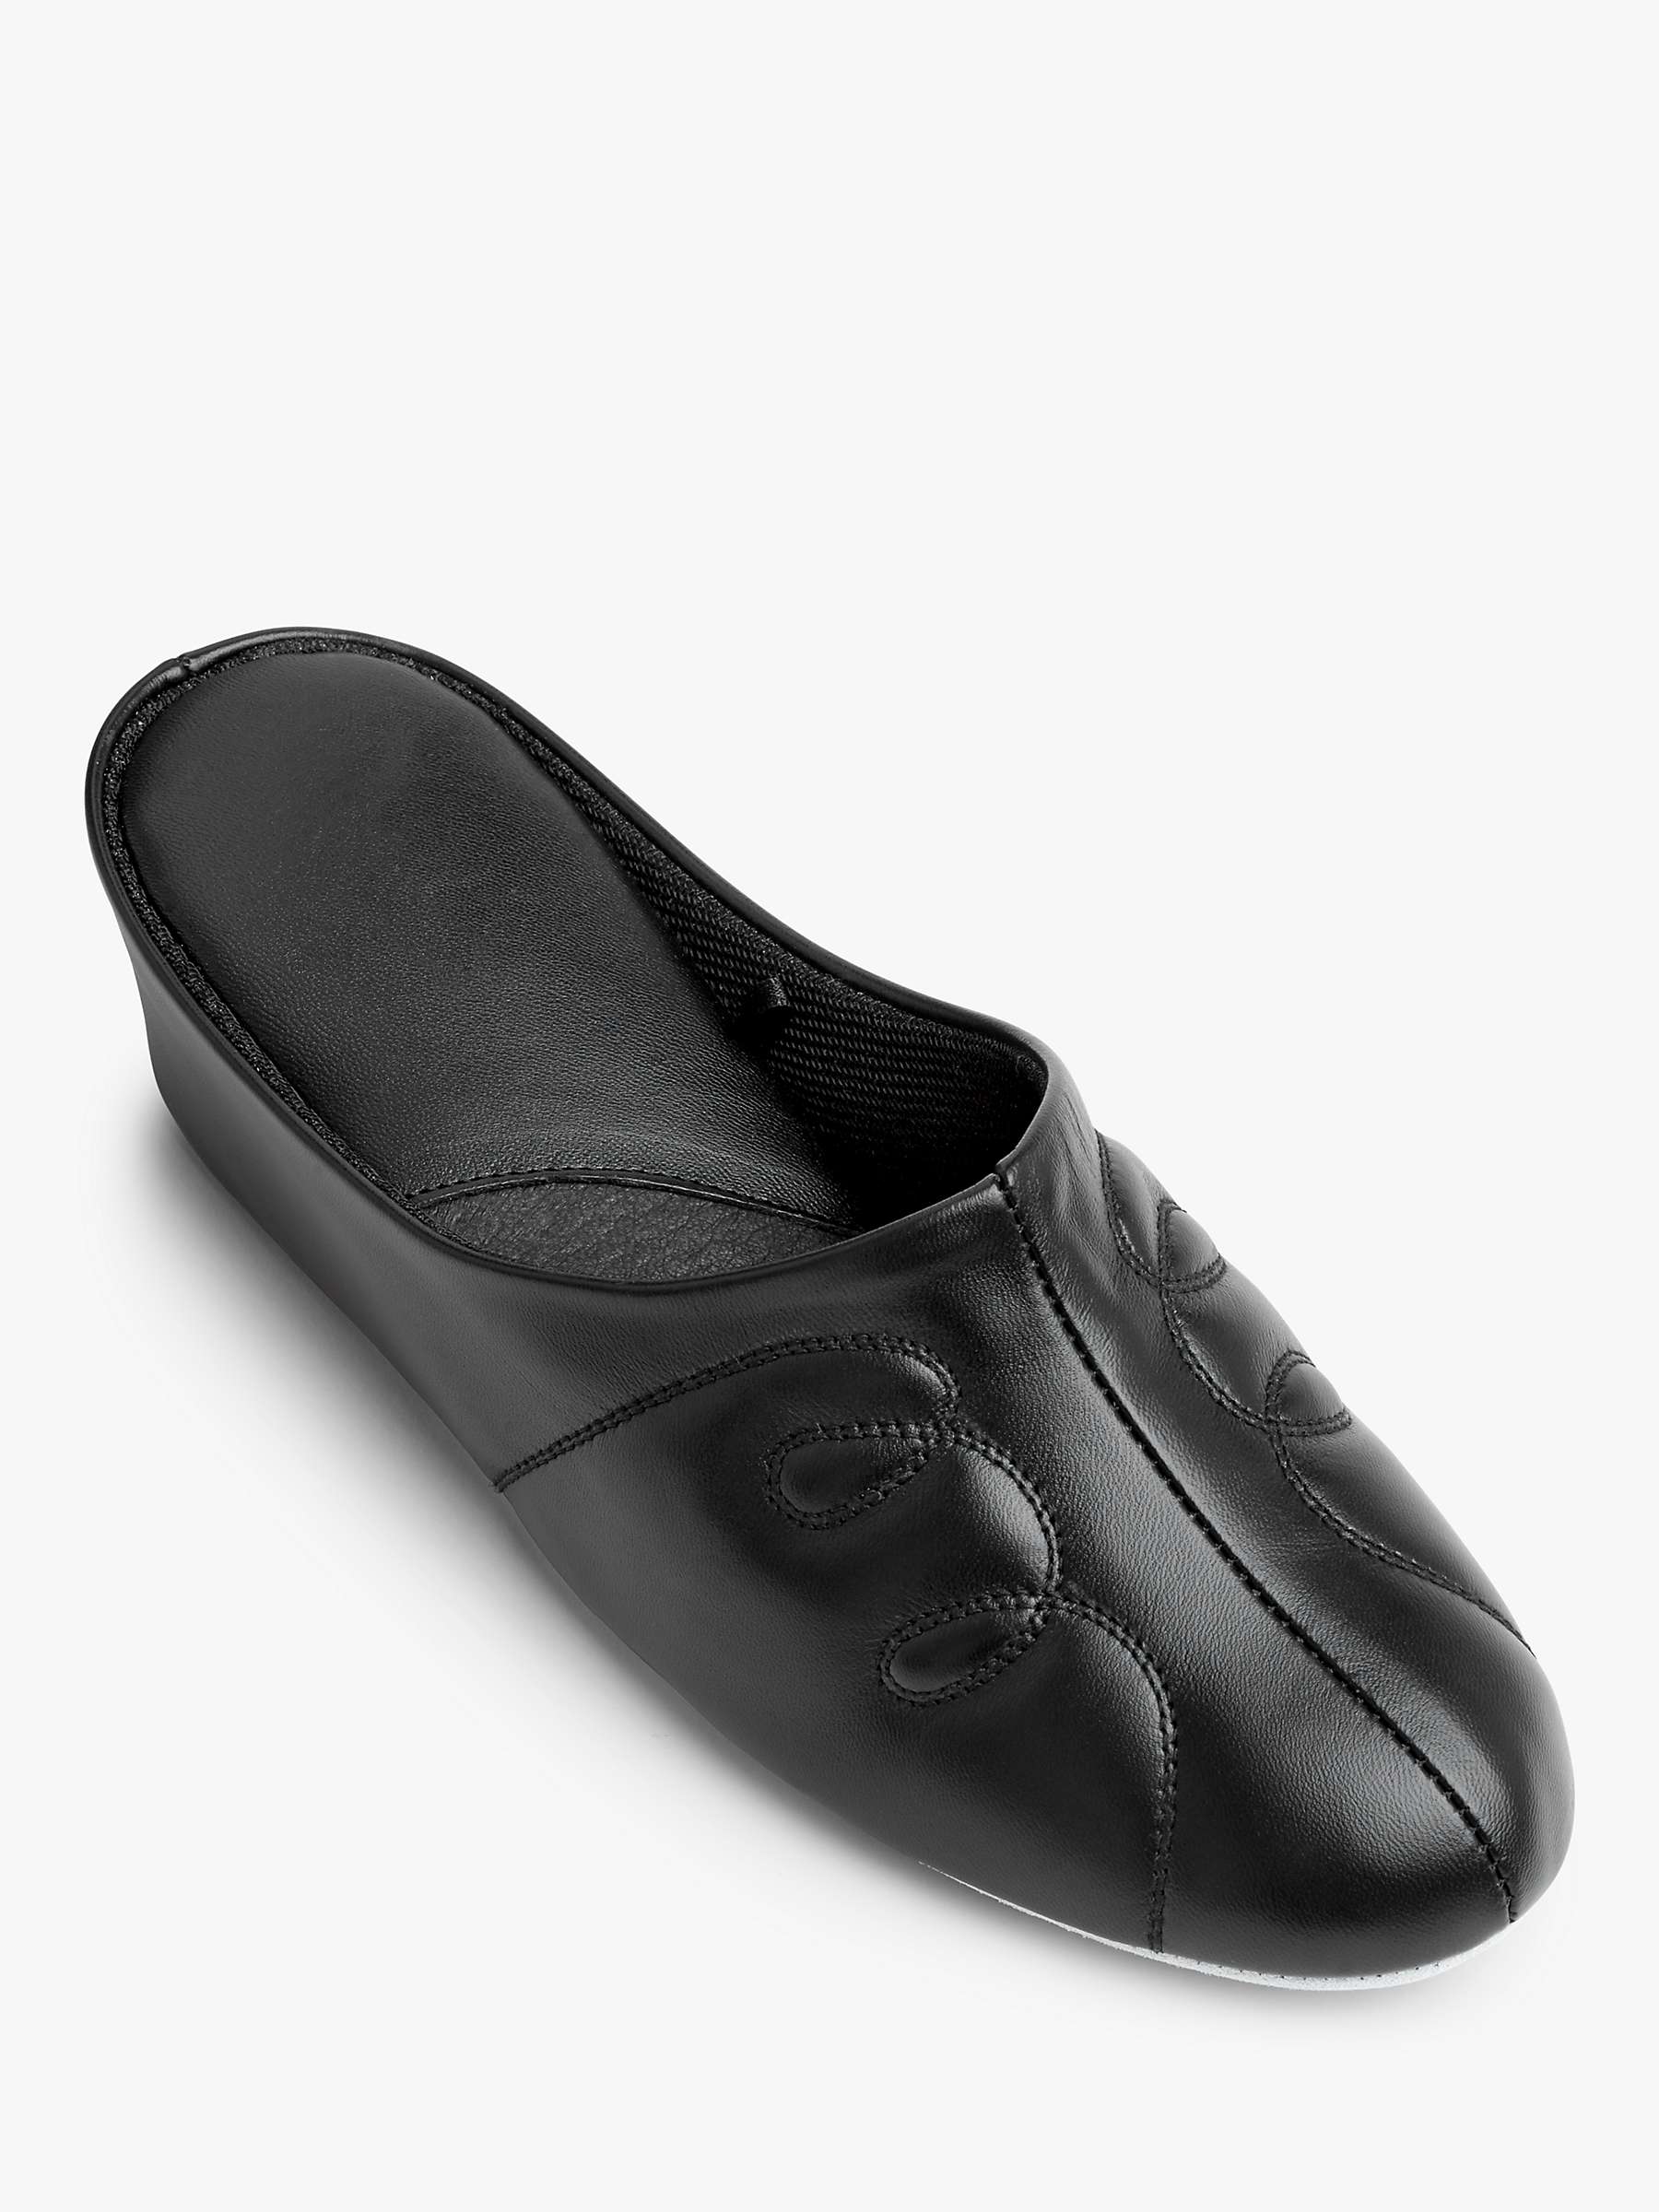 Buy John Lewis Tricia Leather Mule Slippers Online at johnlewis.com